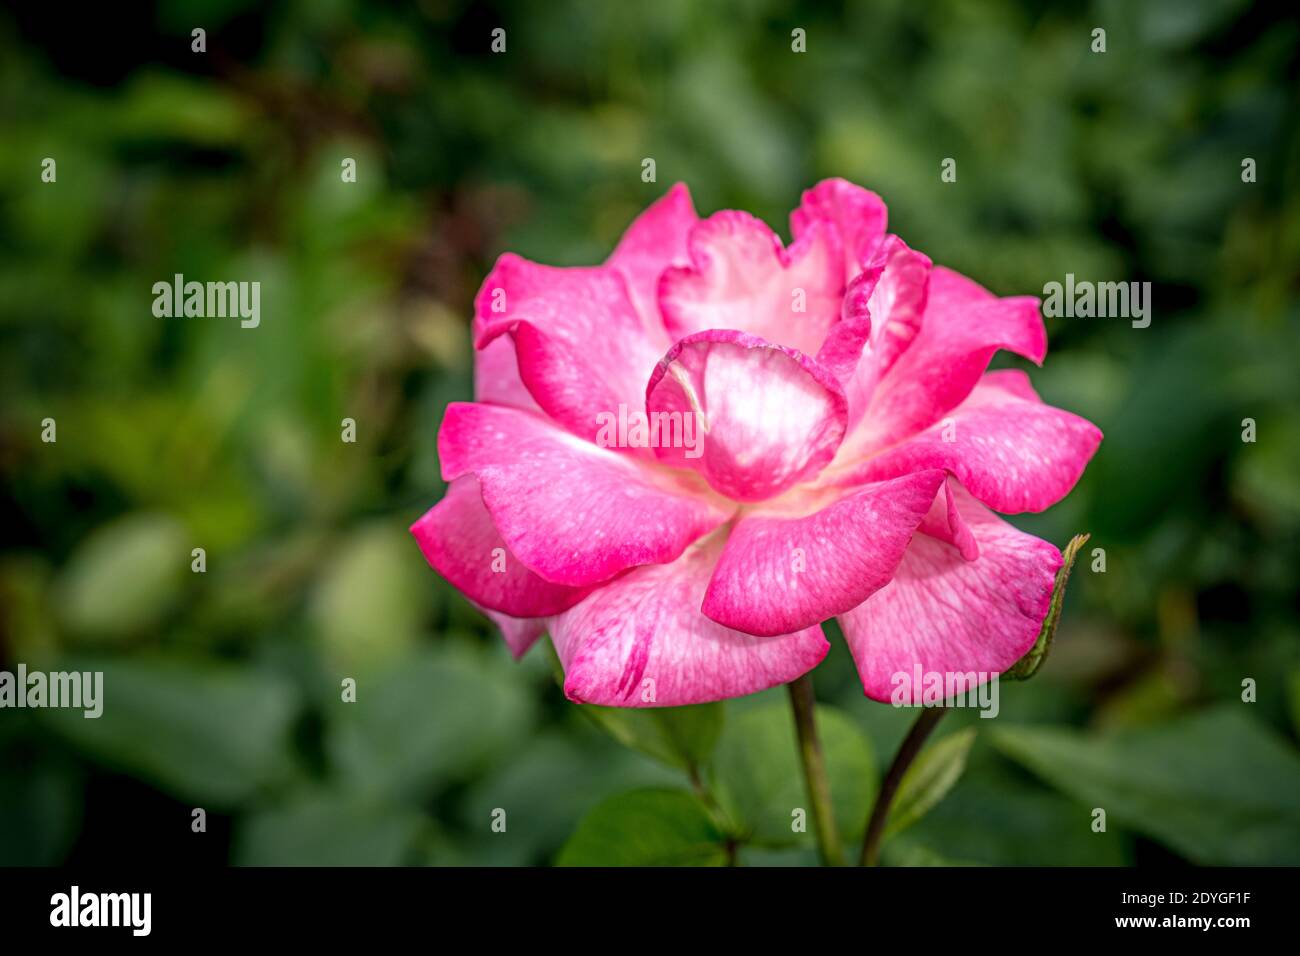 Pink rose as a natural and holidays background Stock Photo